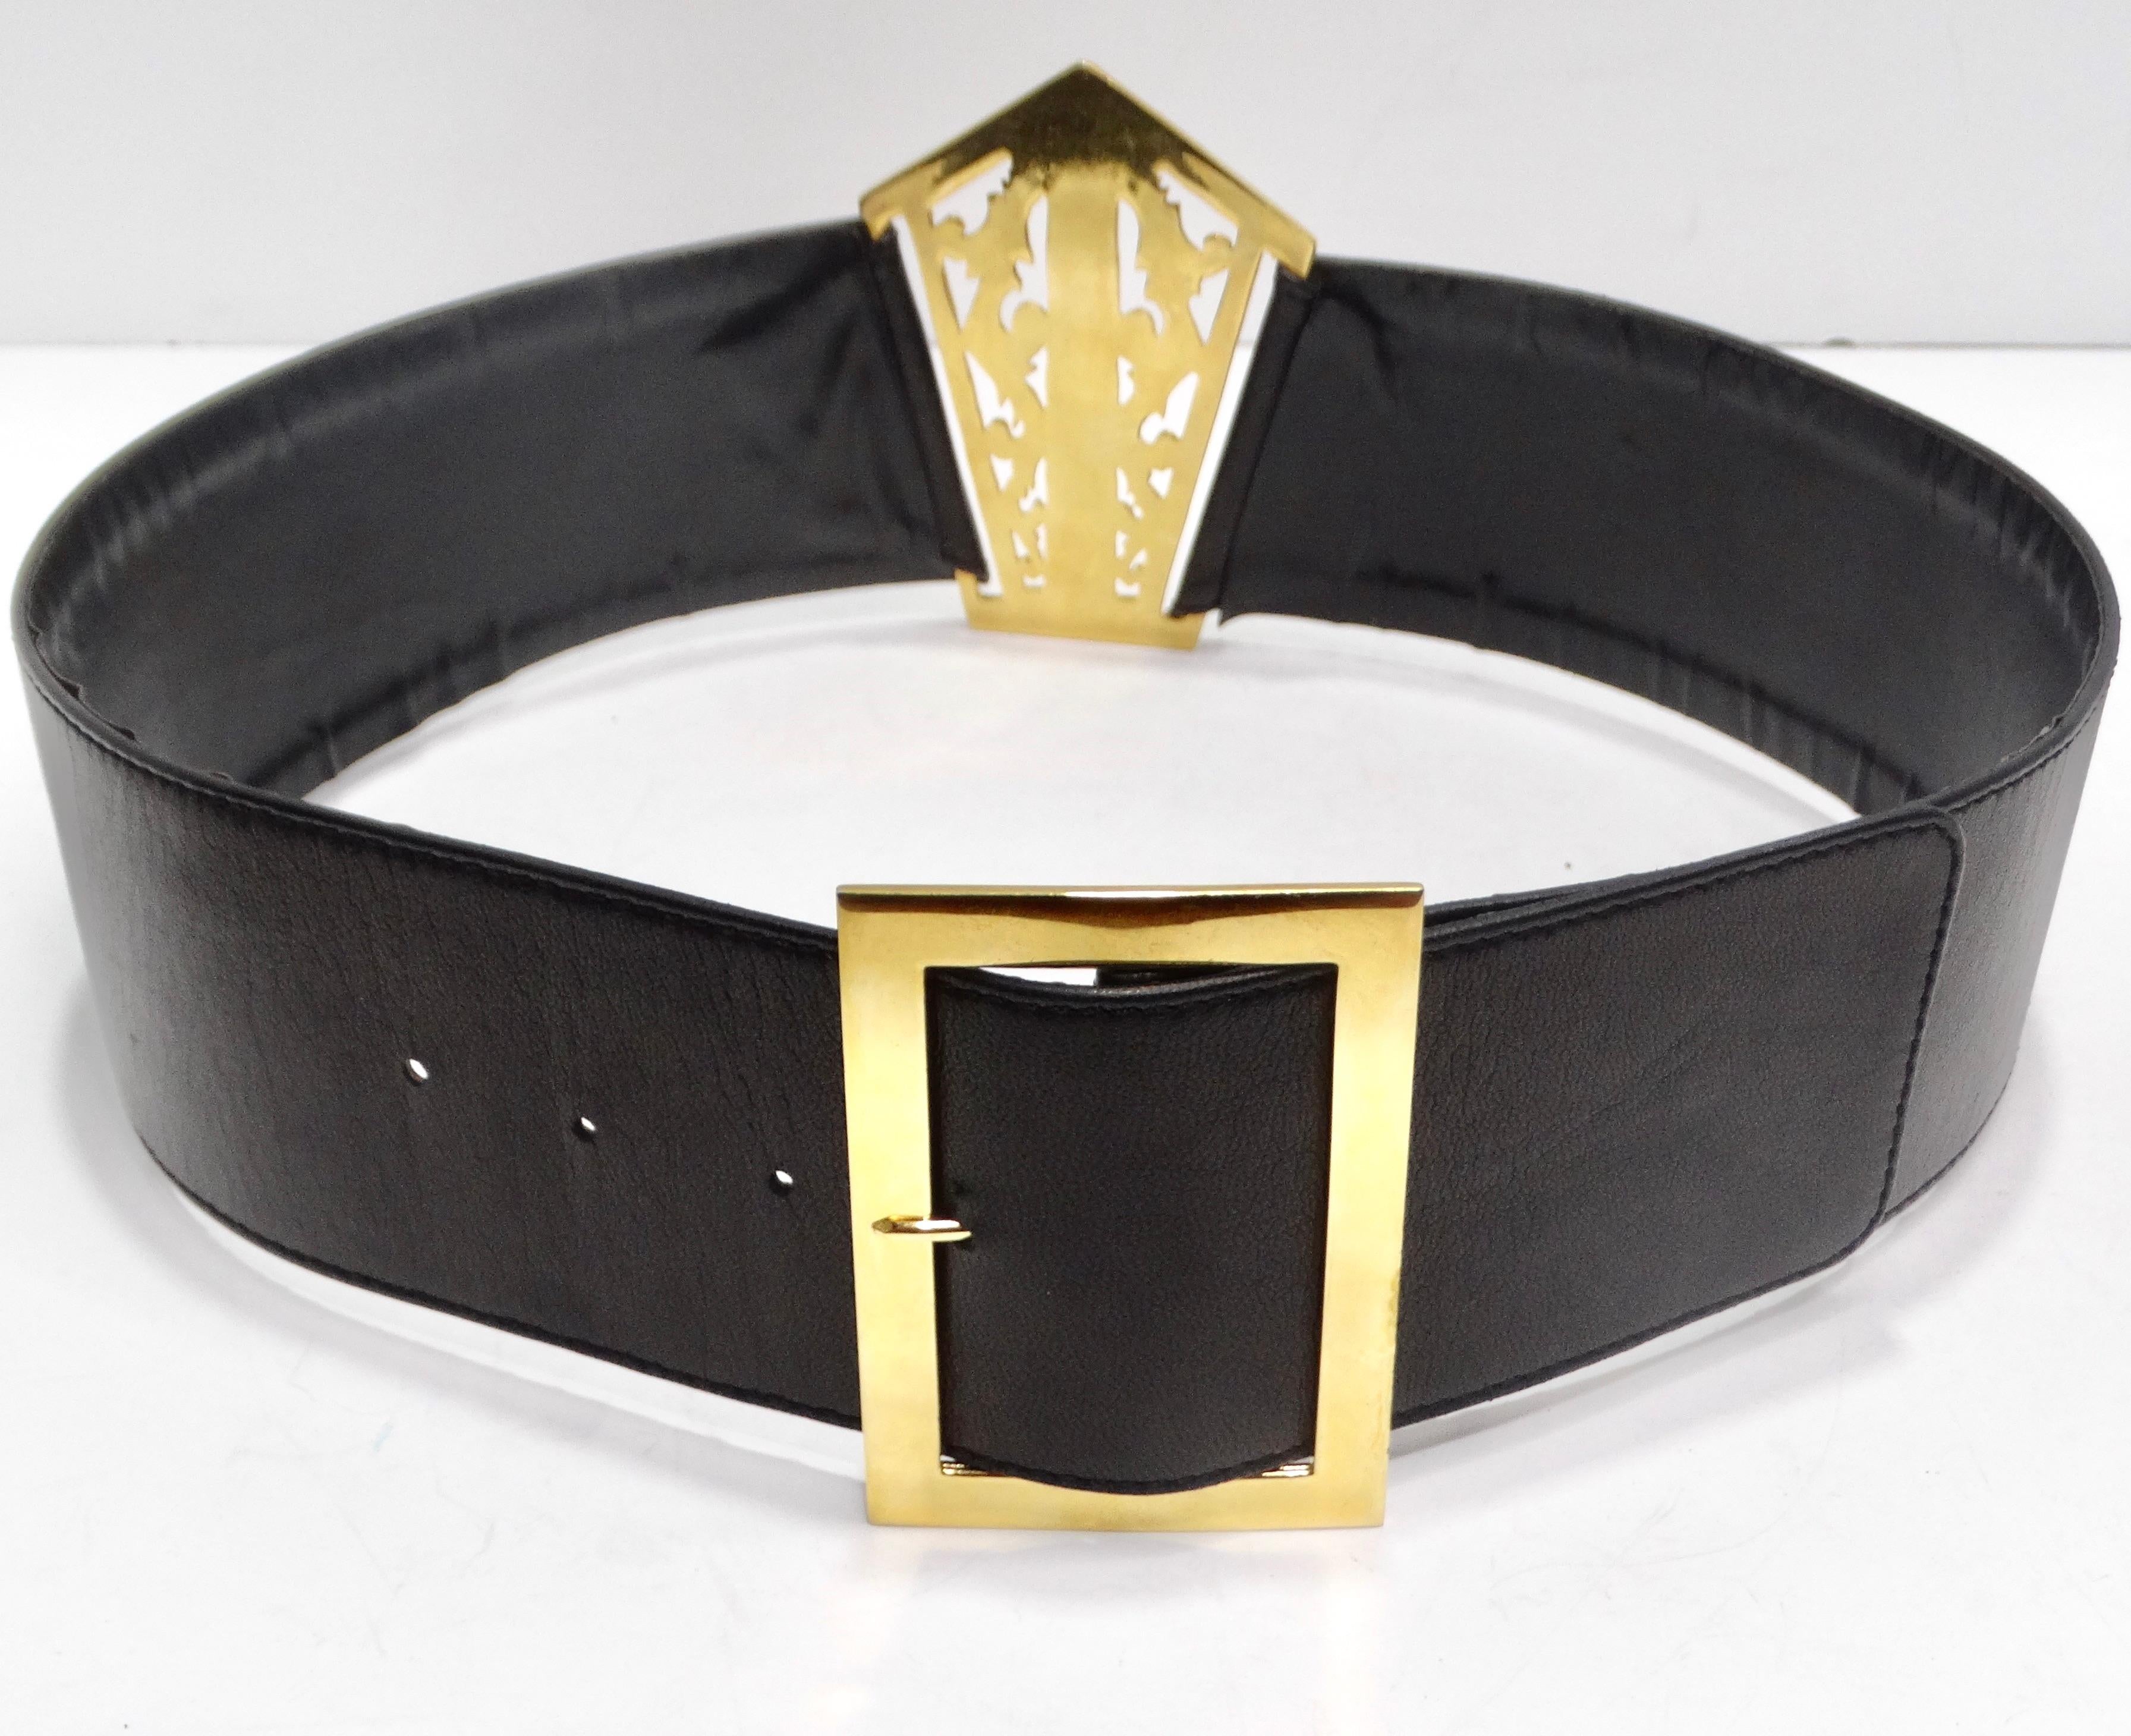 Elevate your style with the timeless allure of the Chanel 1980s Black Leather 24k Gold-Plated Filigree Belt – a wide black leather statement piece that exudes vintage glamour. This belt features a luxurious gold-plated square buckle and a